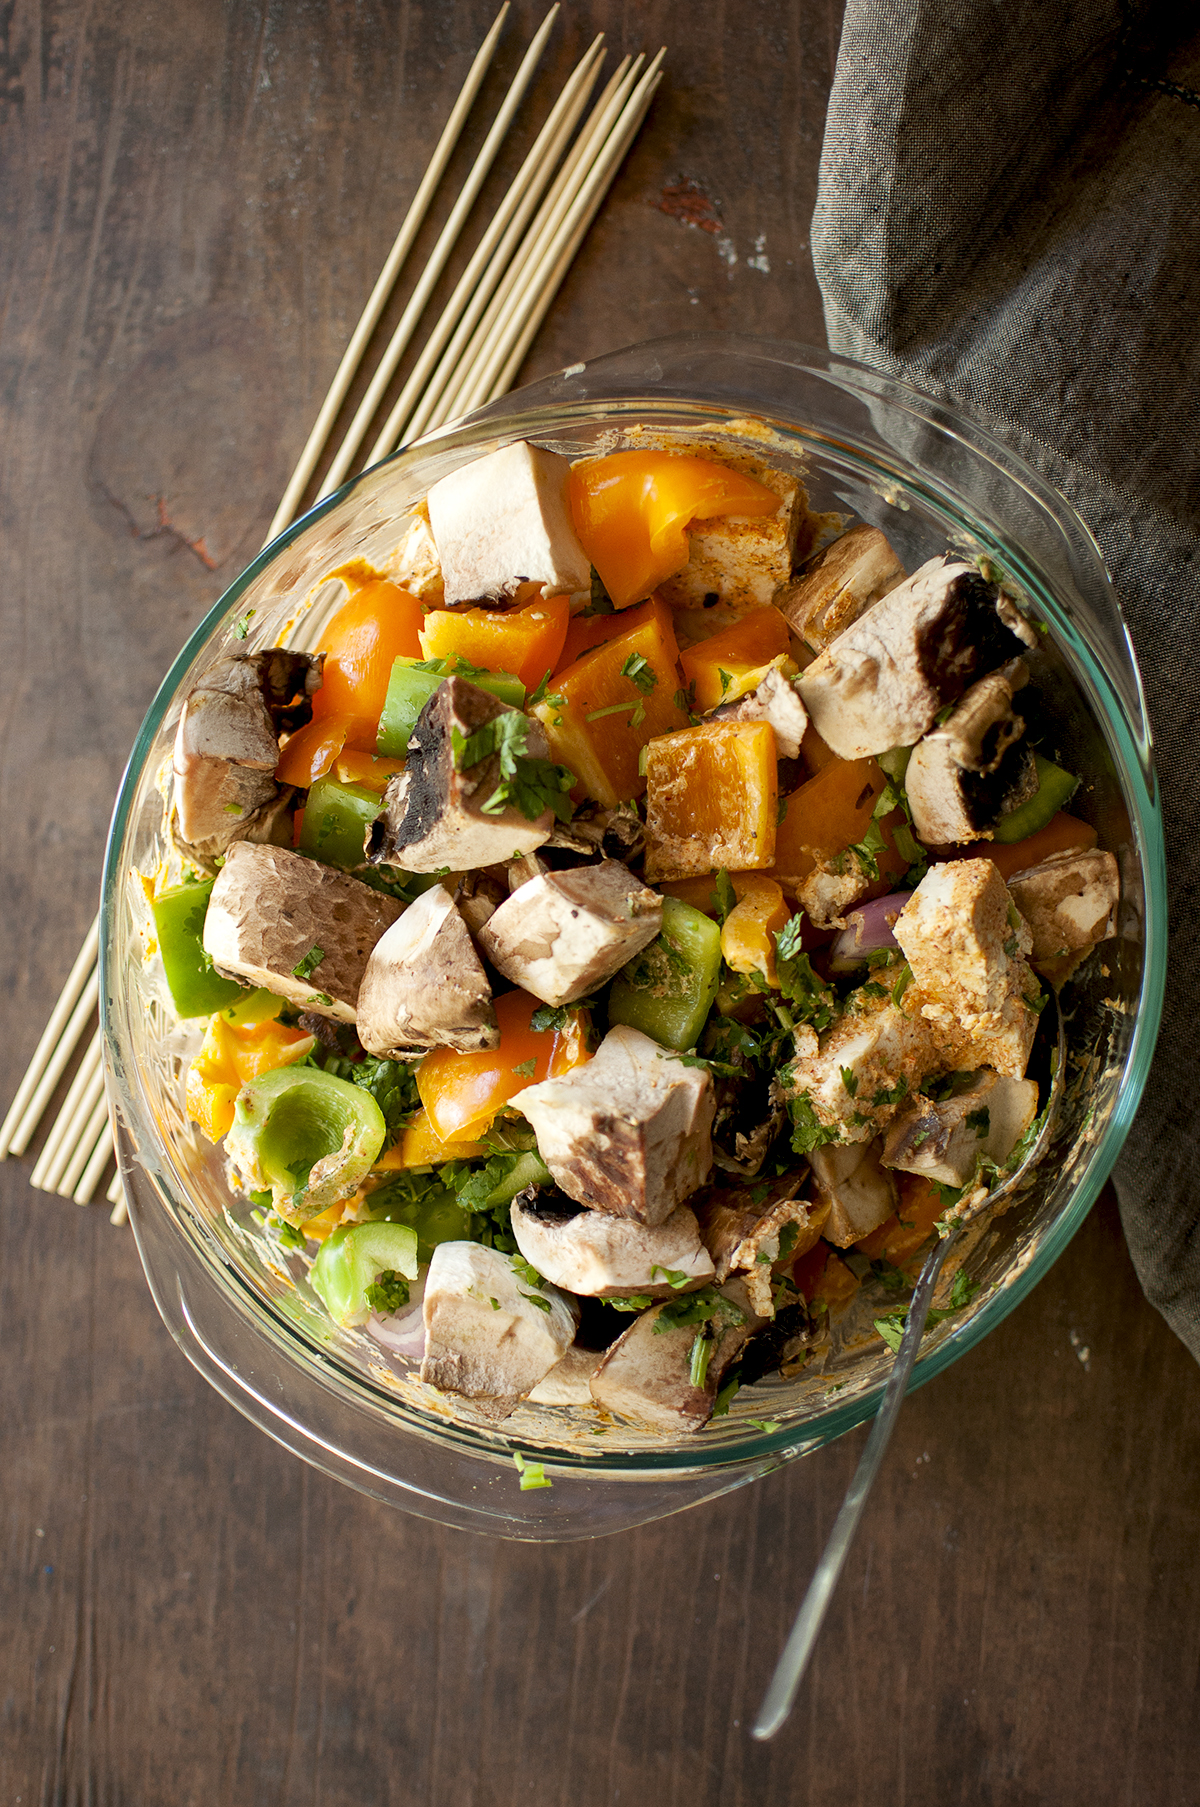 Glass bowl with tofu and veggies in marinade